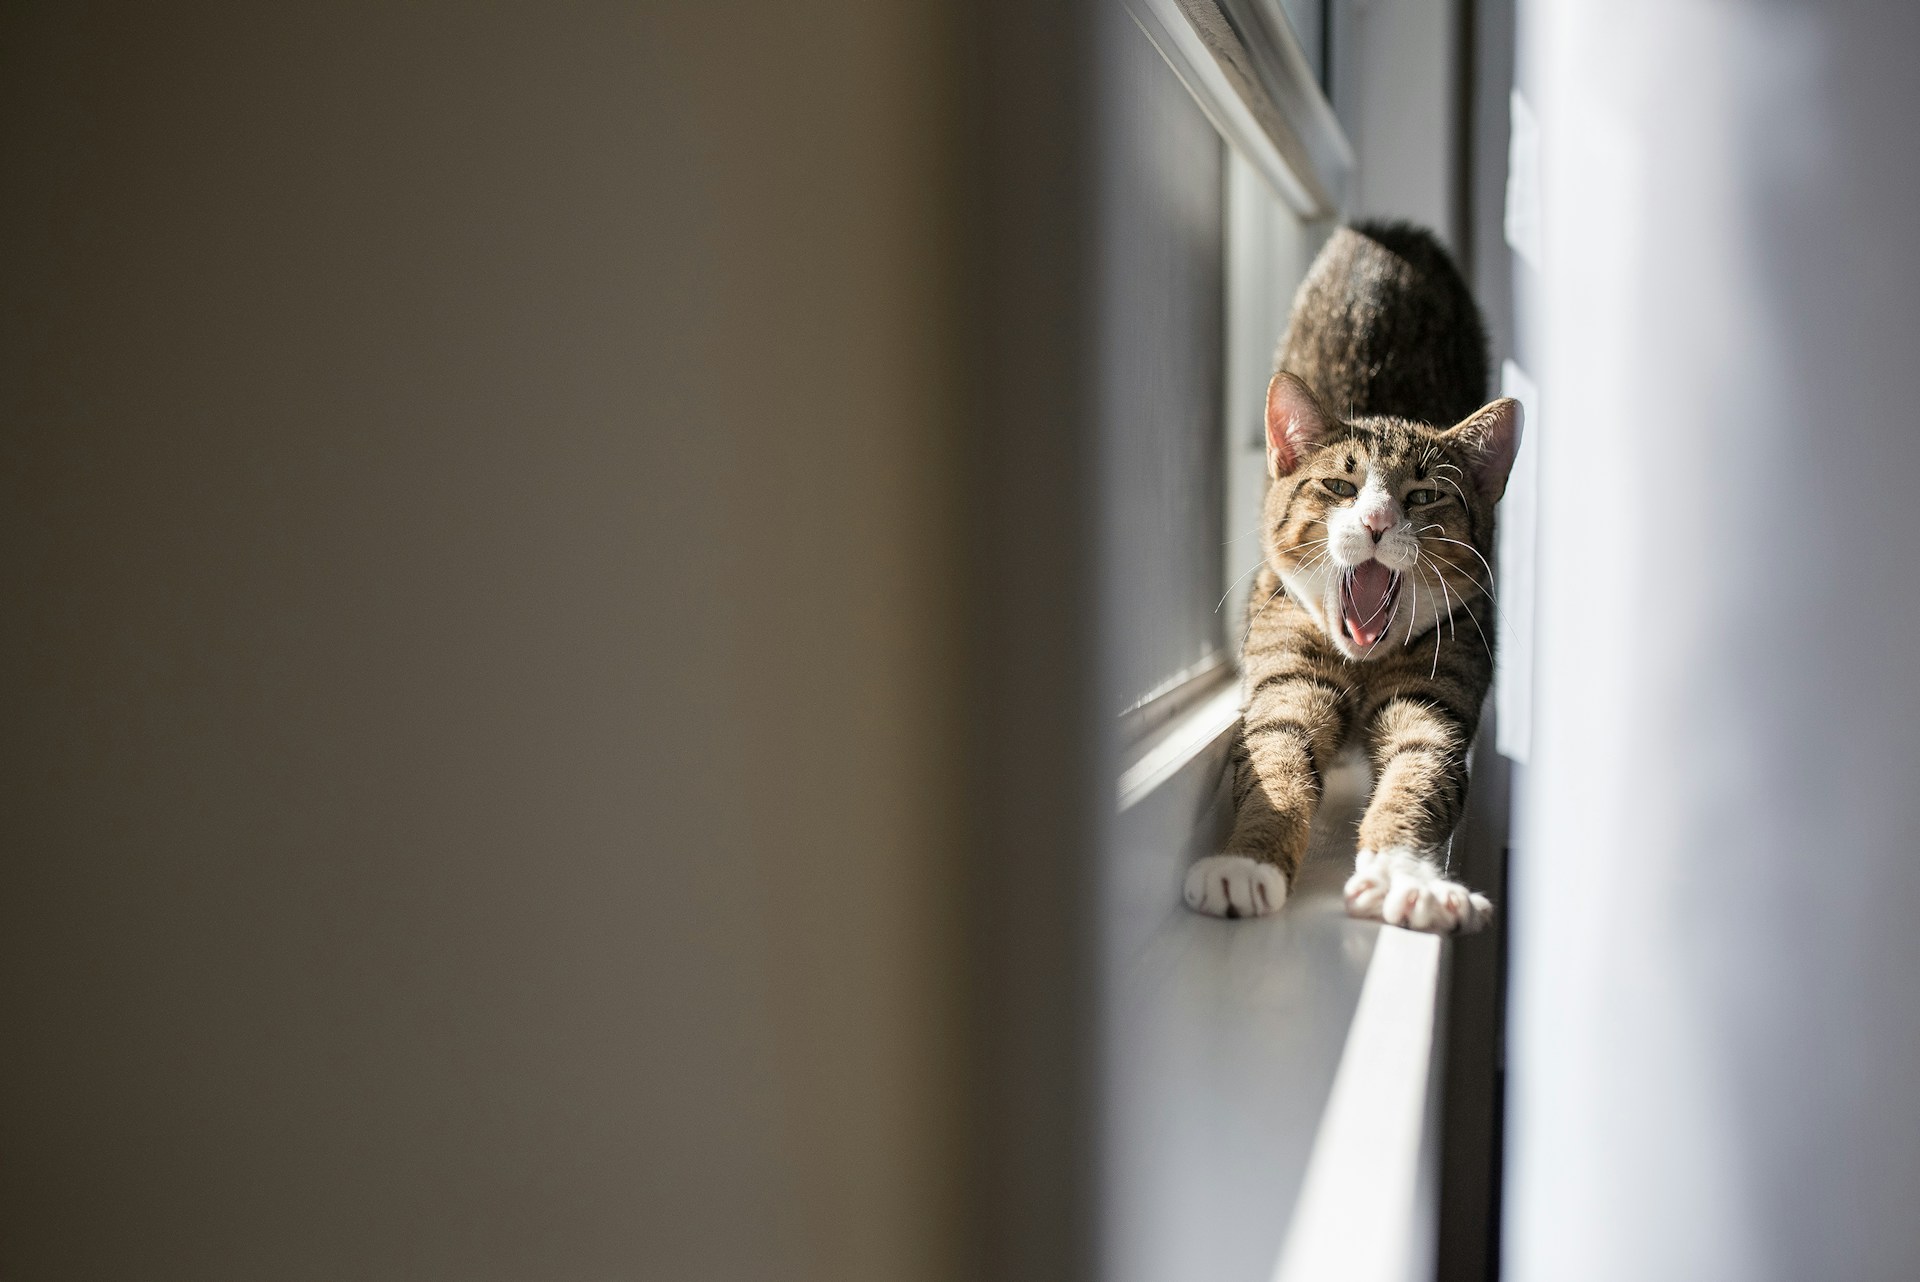 A cat yawning between a window and the blinds